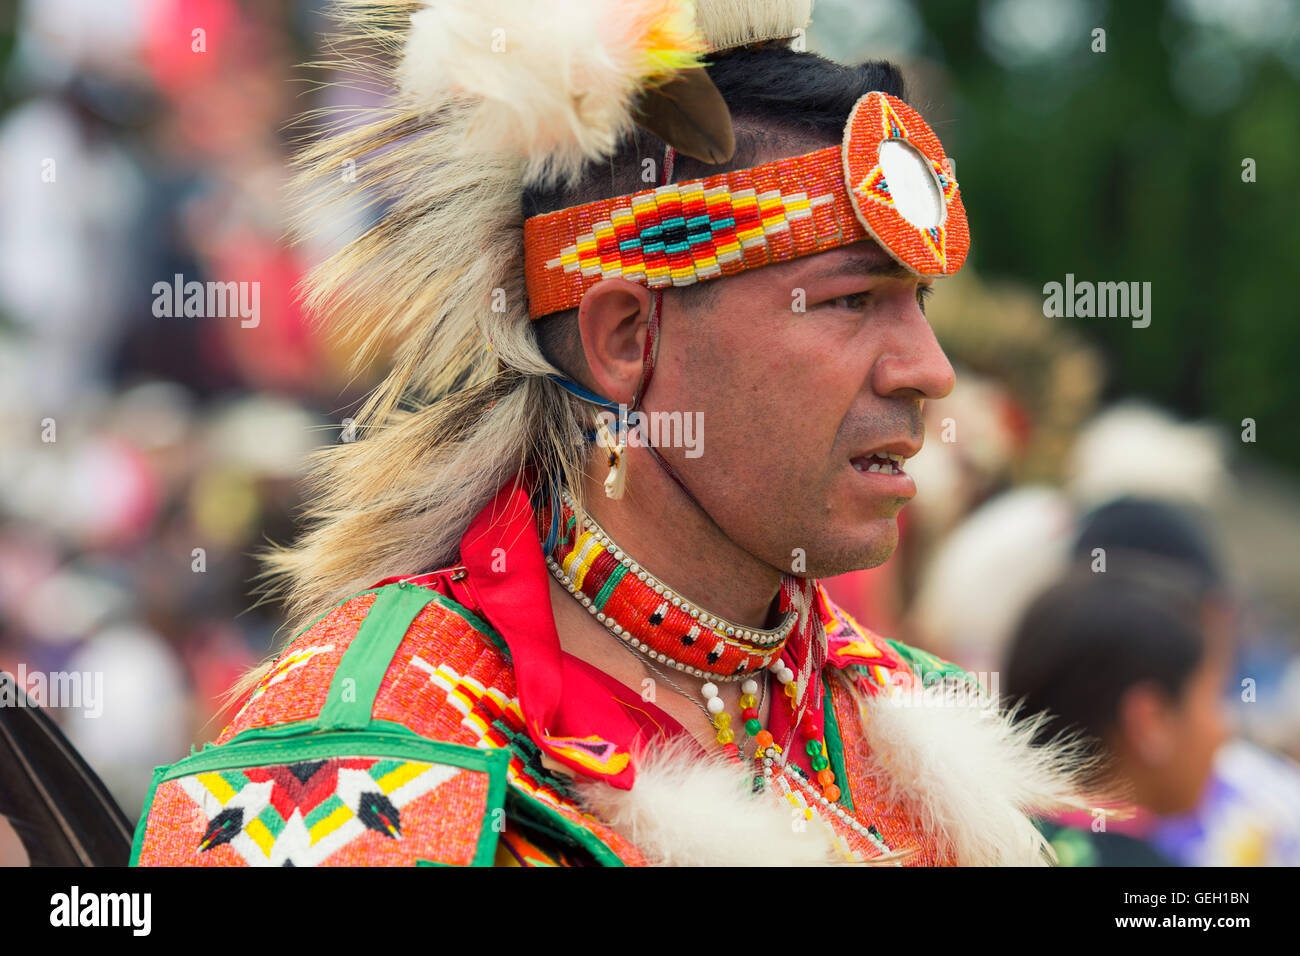 Pow Wow Native Dancer in Traditional Costume at the Six Nations of the Grand River Champion of Champions Powwow, Ohsweken Canada Stock Photo